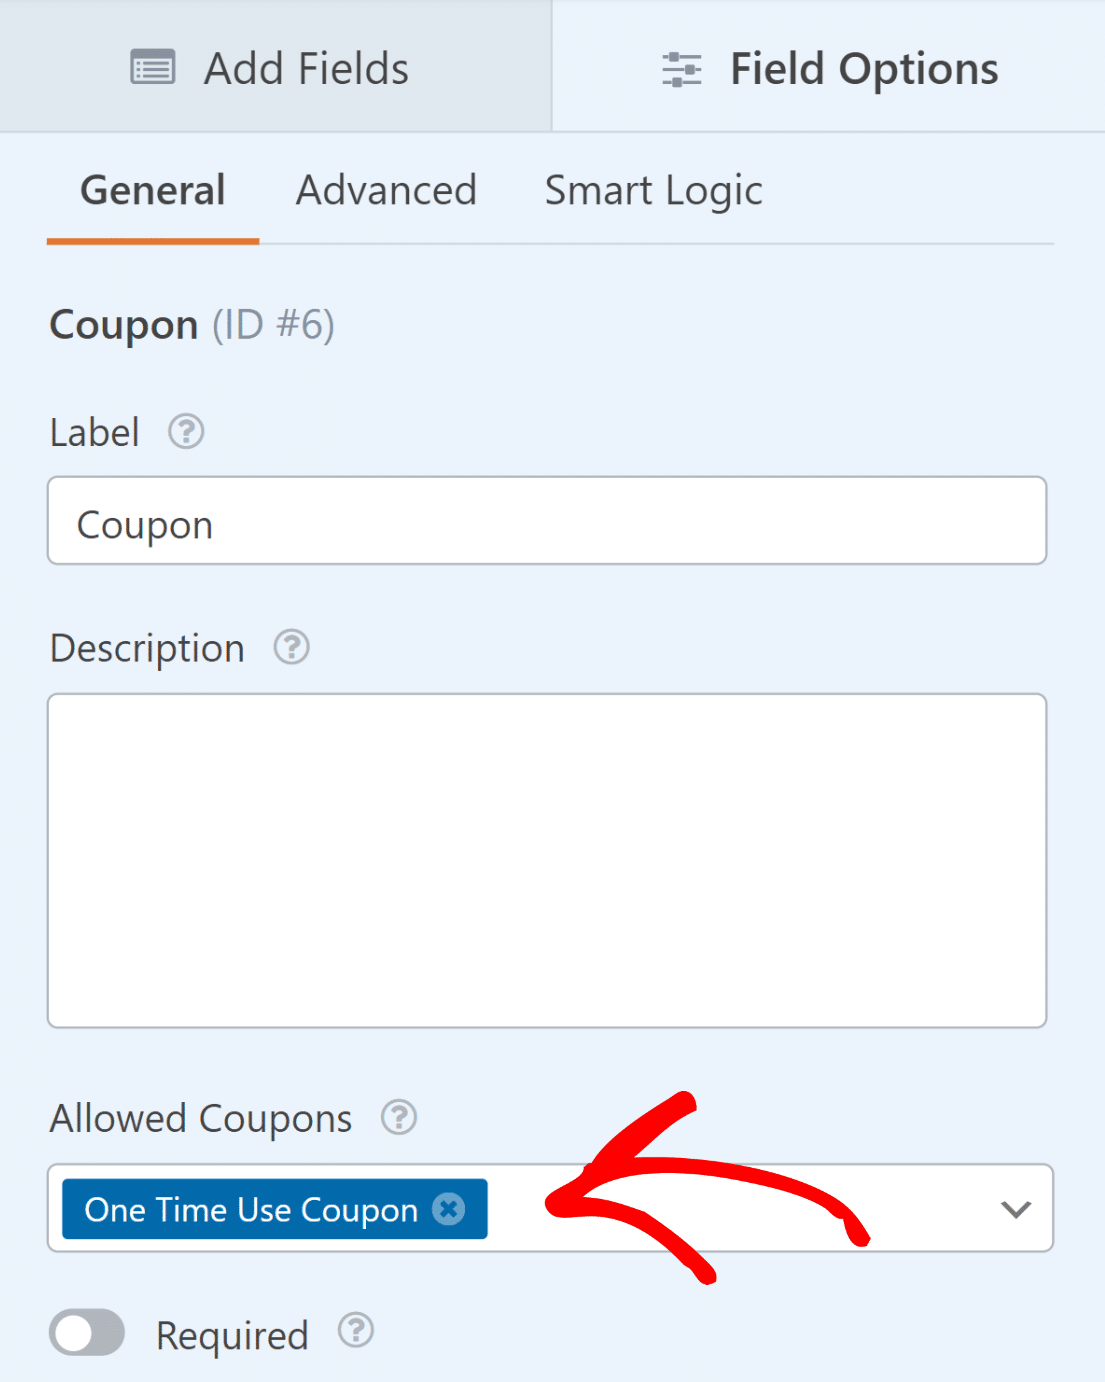 Select your coupon from the drop down